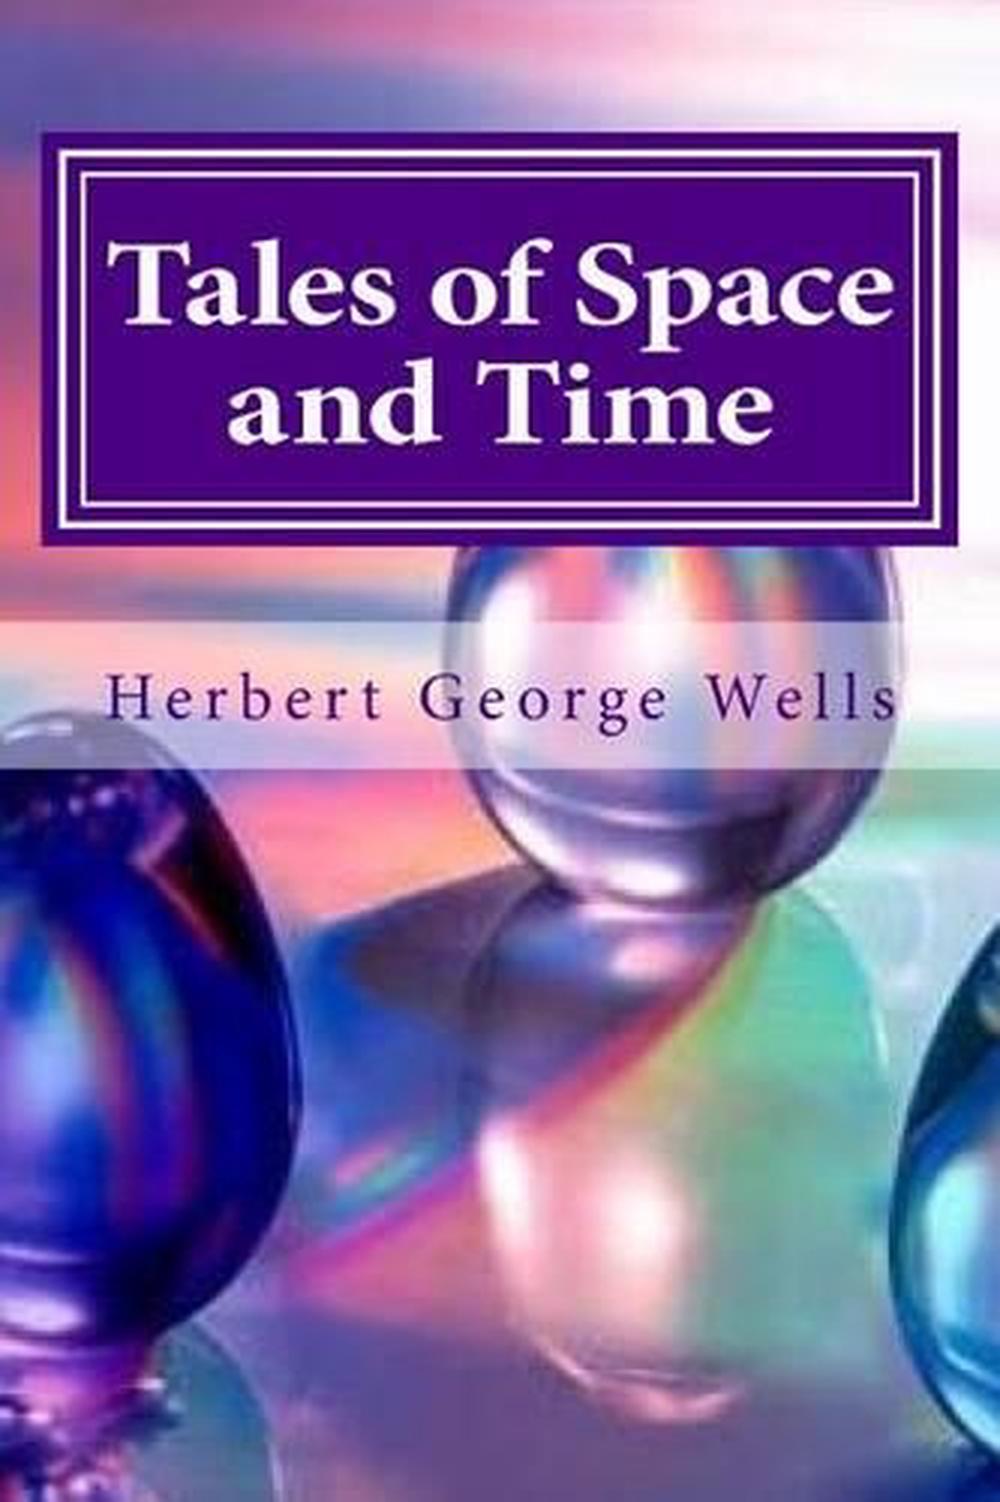 Tales of Space and Time by Herbert George Wells (English) Paperback ...